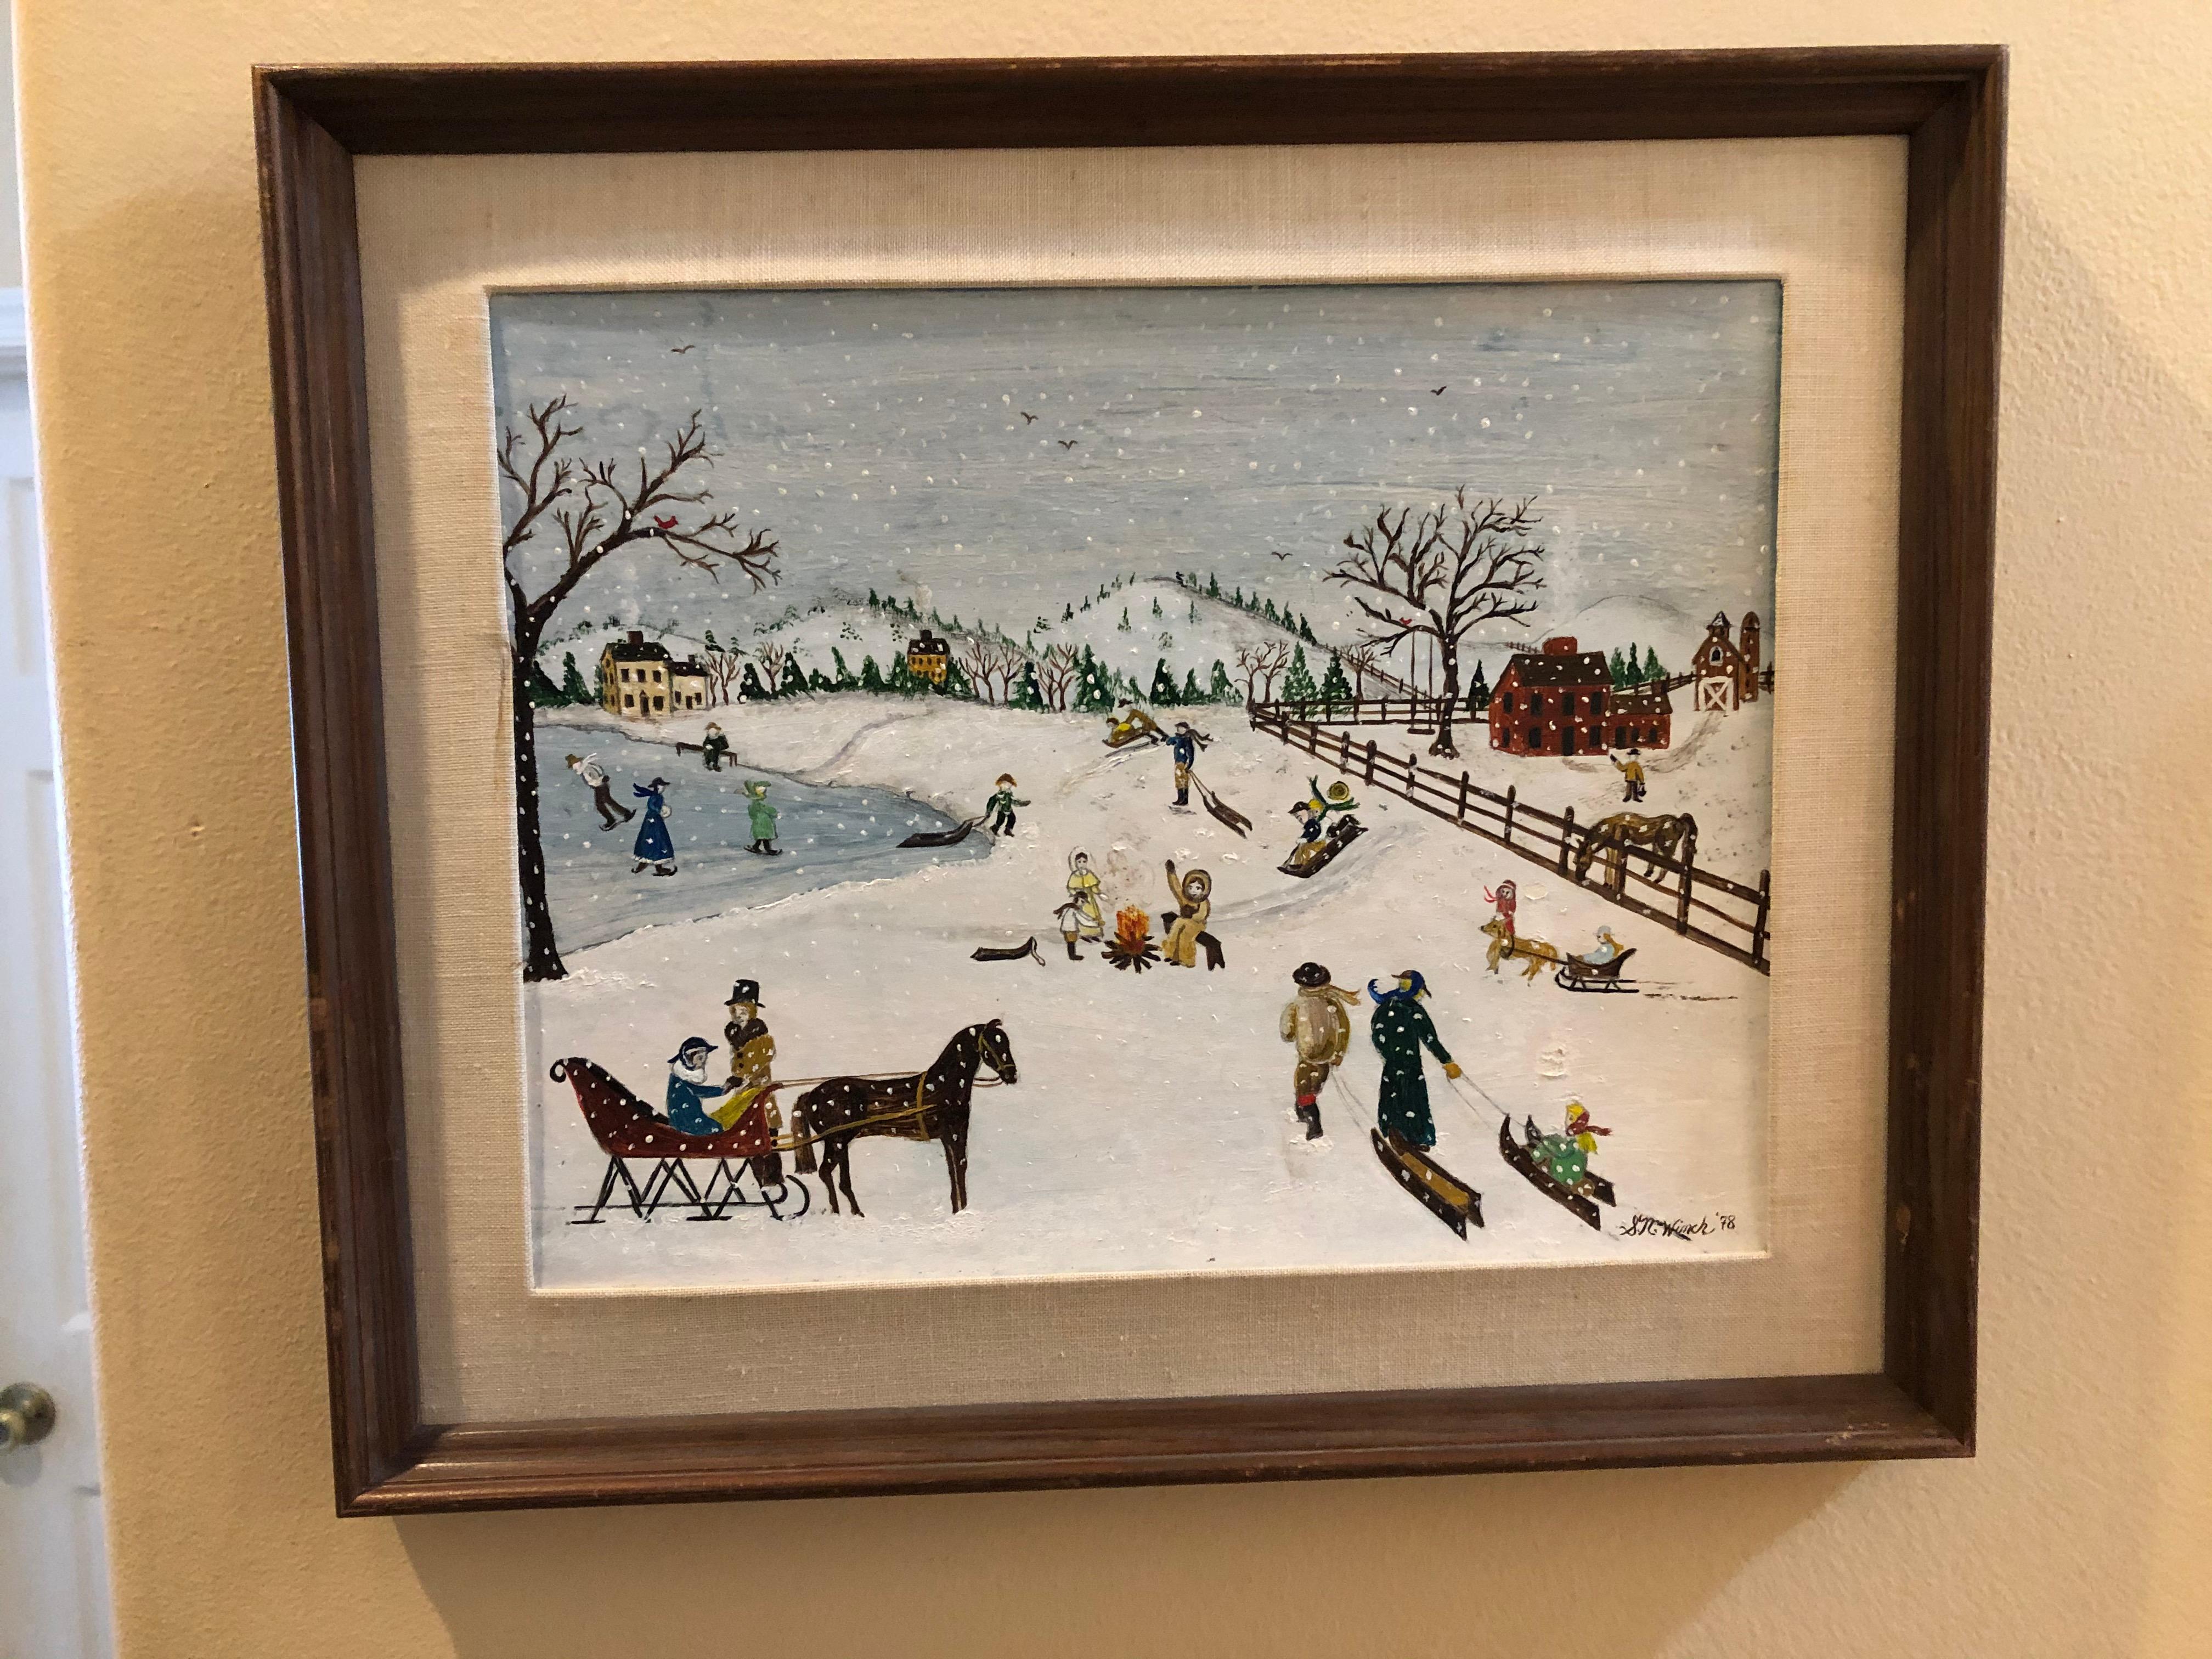 Charming winter scene by folk artist Susan Northey Winch. I believe she comes from a family of folk artists from the northeast. Oil on board measures 14 by 11. Frame is 18 by 15.